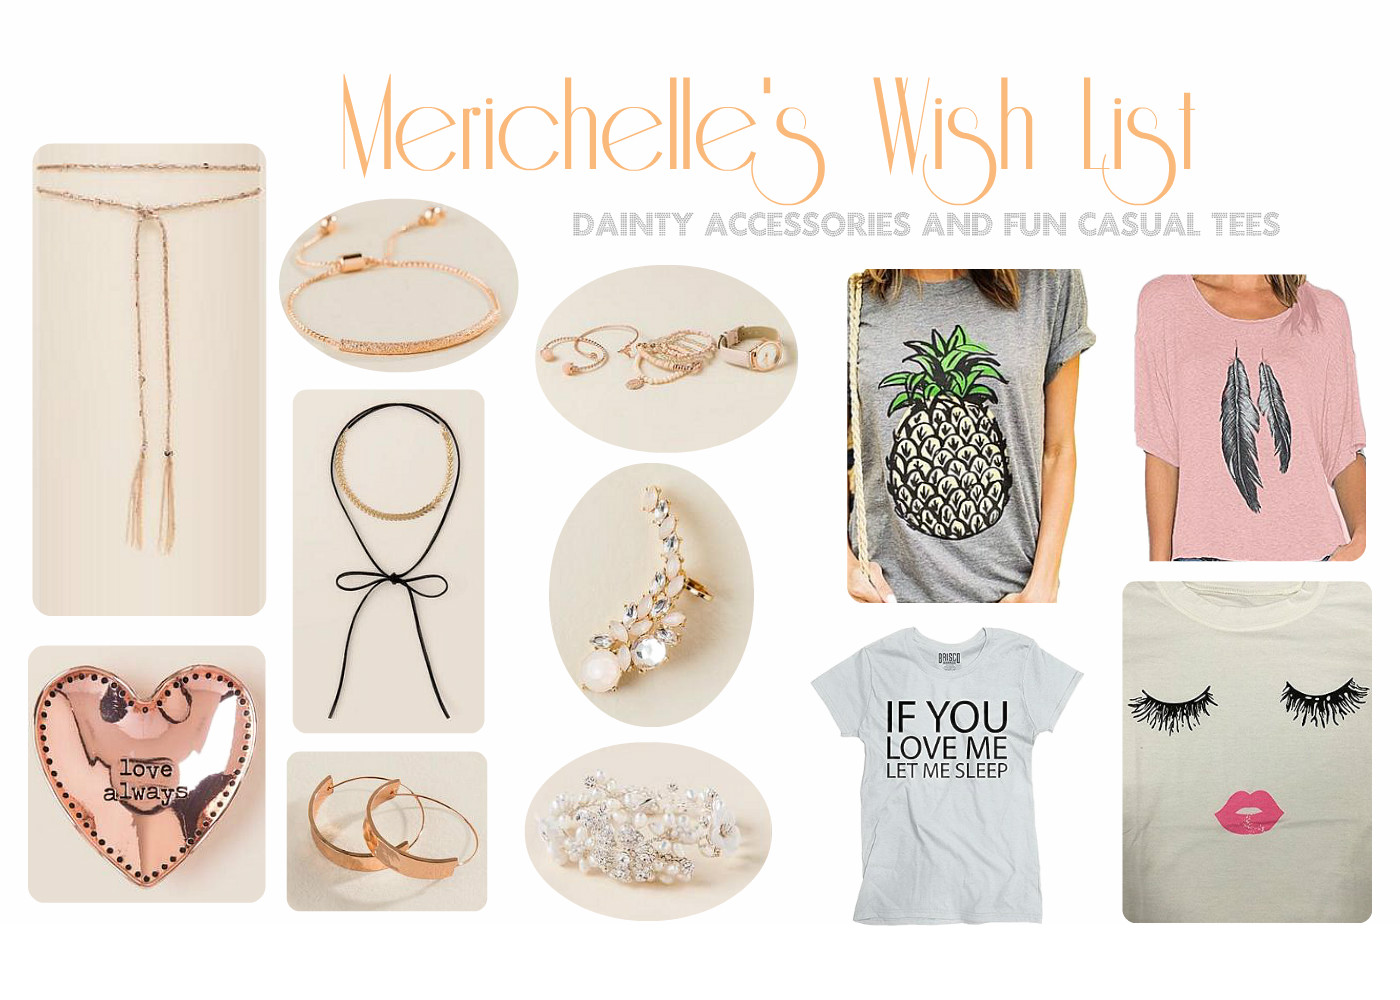 Christmas Wish List Casual Fashion Casual Tees Fun Tees Humor Tees Mom Tees Rose Gold Rose Gold Accessories Rose Gold Jewelry Crawler Earrings Pearl Flower Bracelet Rose Gold Bracelet Rose Gold Necklace Rose Gold Choker Bow Choker